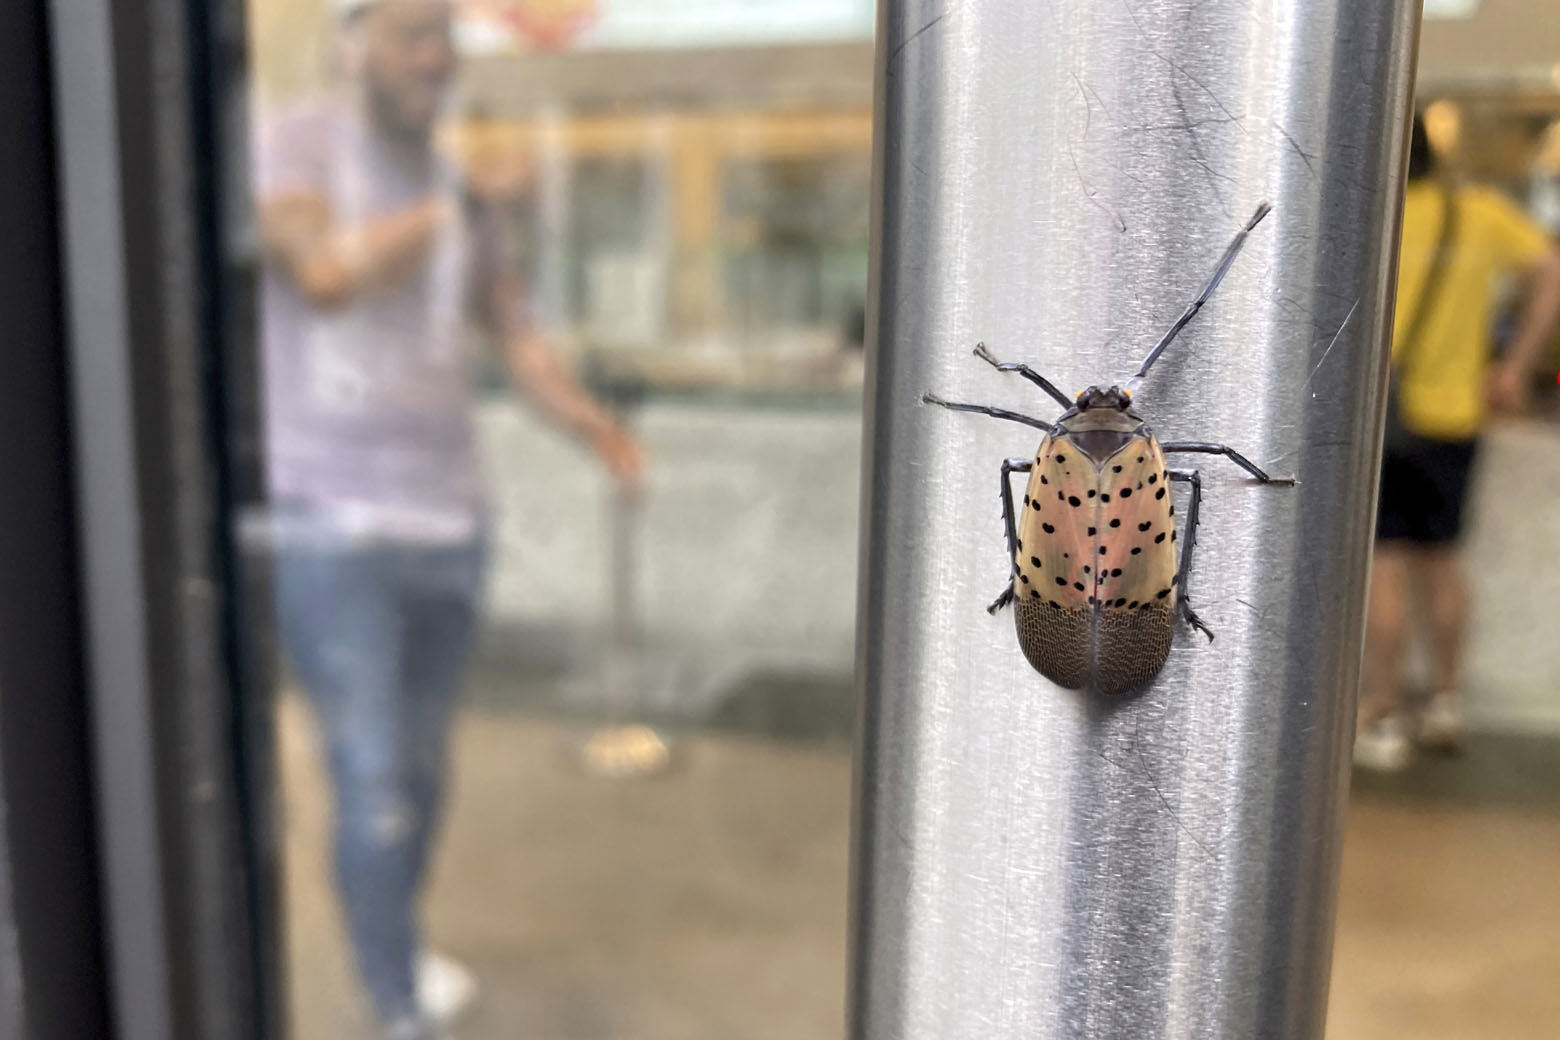 A spotted lanternfly is on a restaurant door handle in lower Manhattan in New York City on Tuesday, August 2, 2022. Agriculture experts say the invasive flying insect pests threaten the country's grape, orchard, nursery, and logging industries. (AP Photo/Ted Shaffrey)